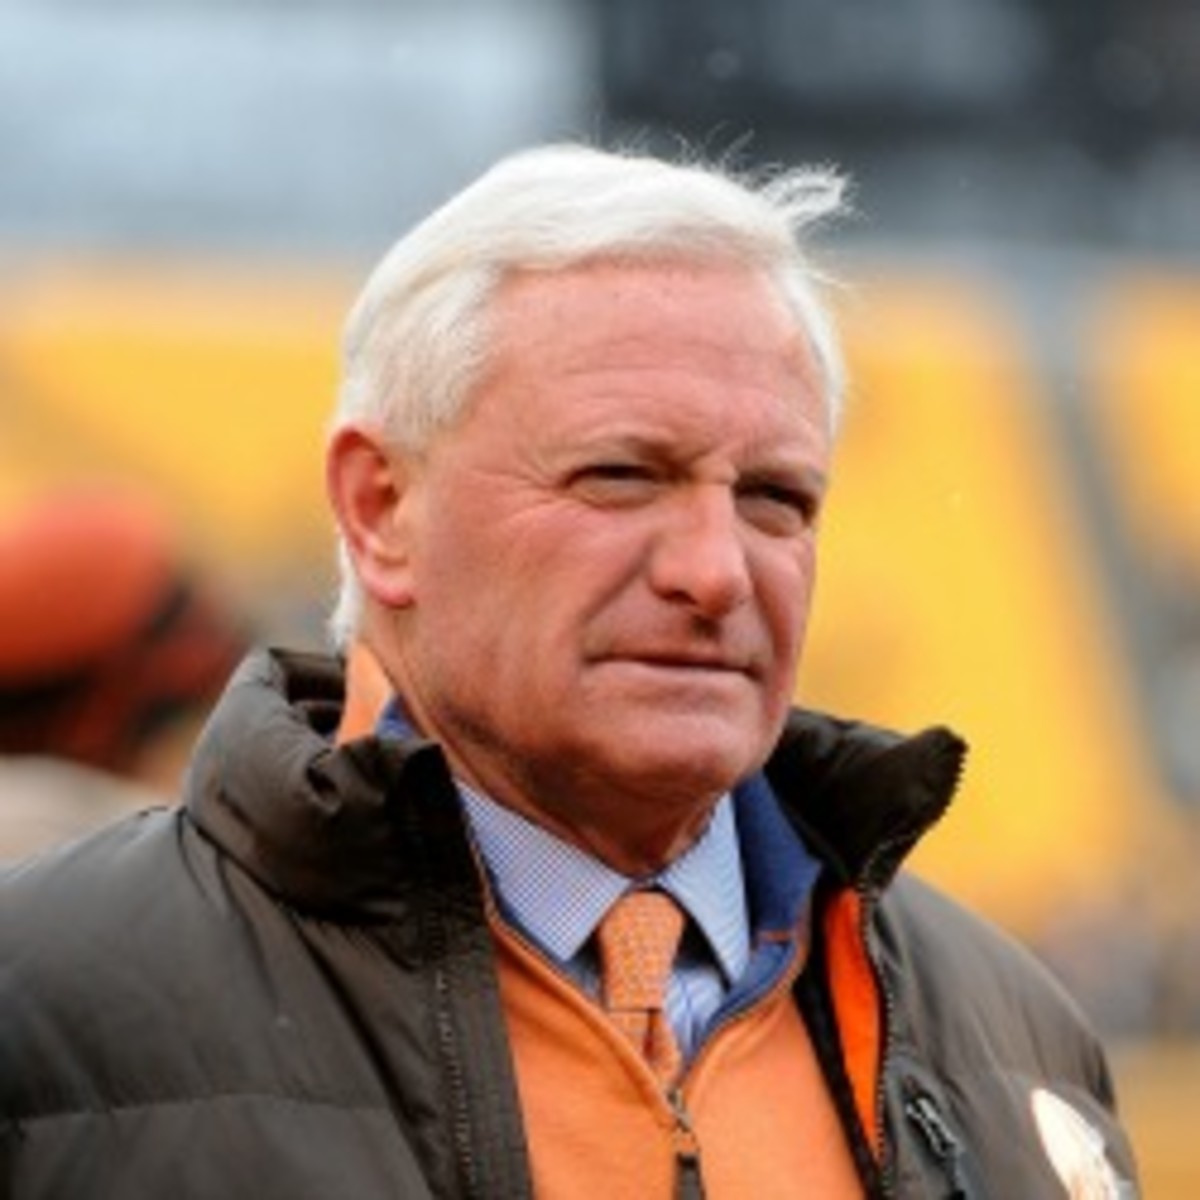 Browns owner Jimmy Haslam is facing a class-action lawsuit for fraud. (George Gojkovich/Getty Images)